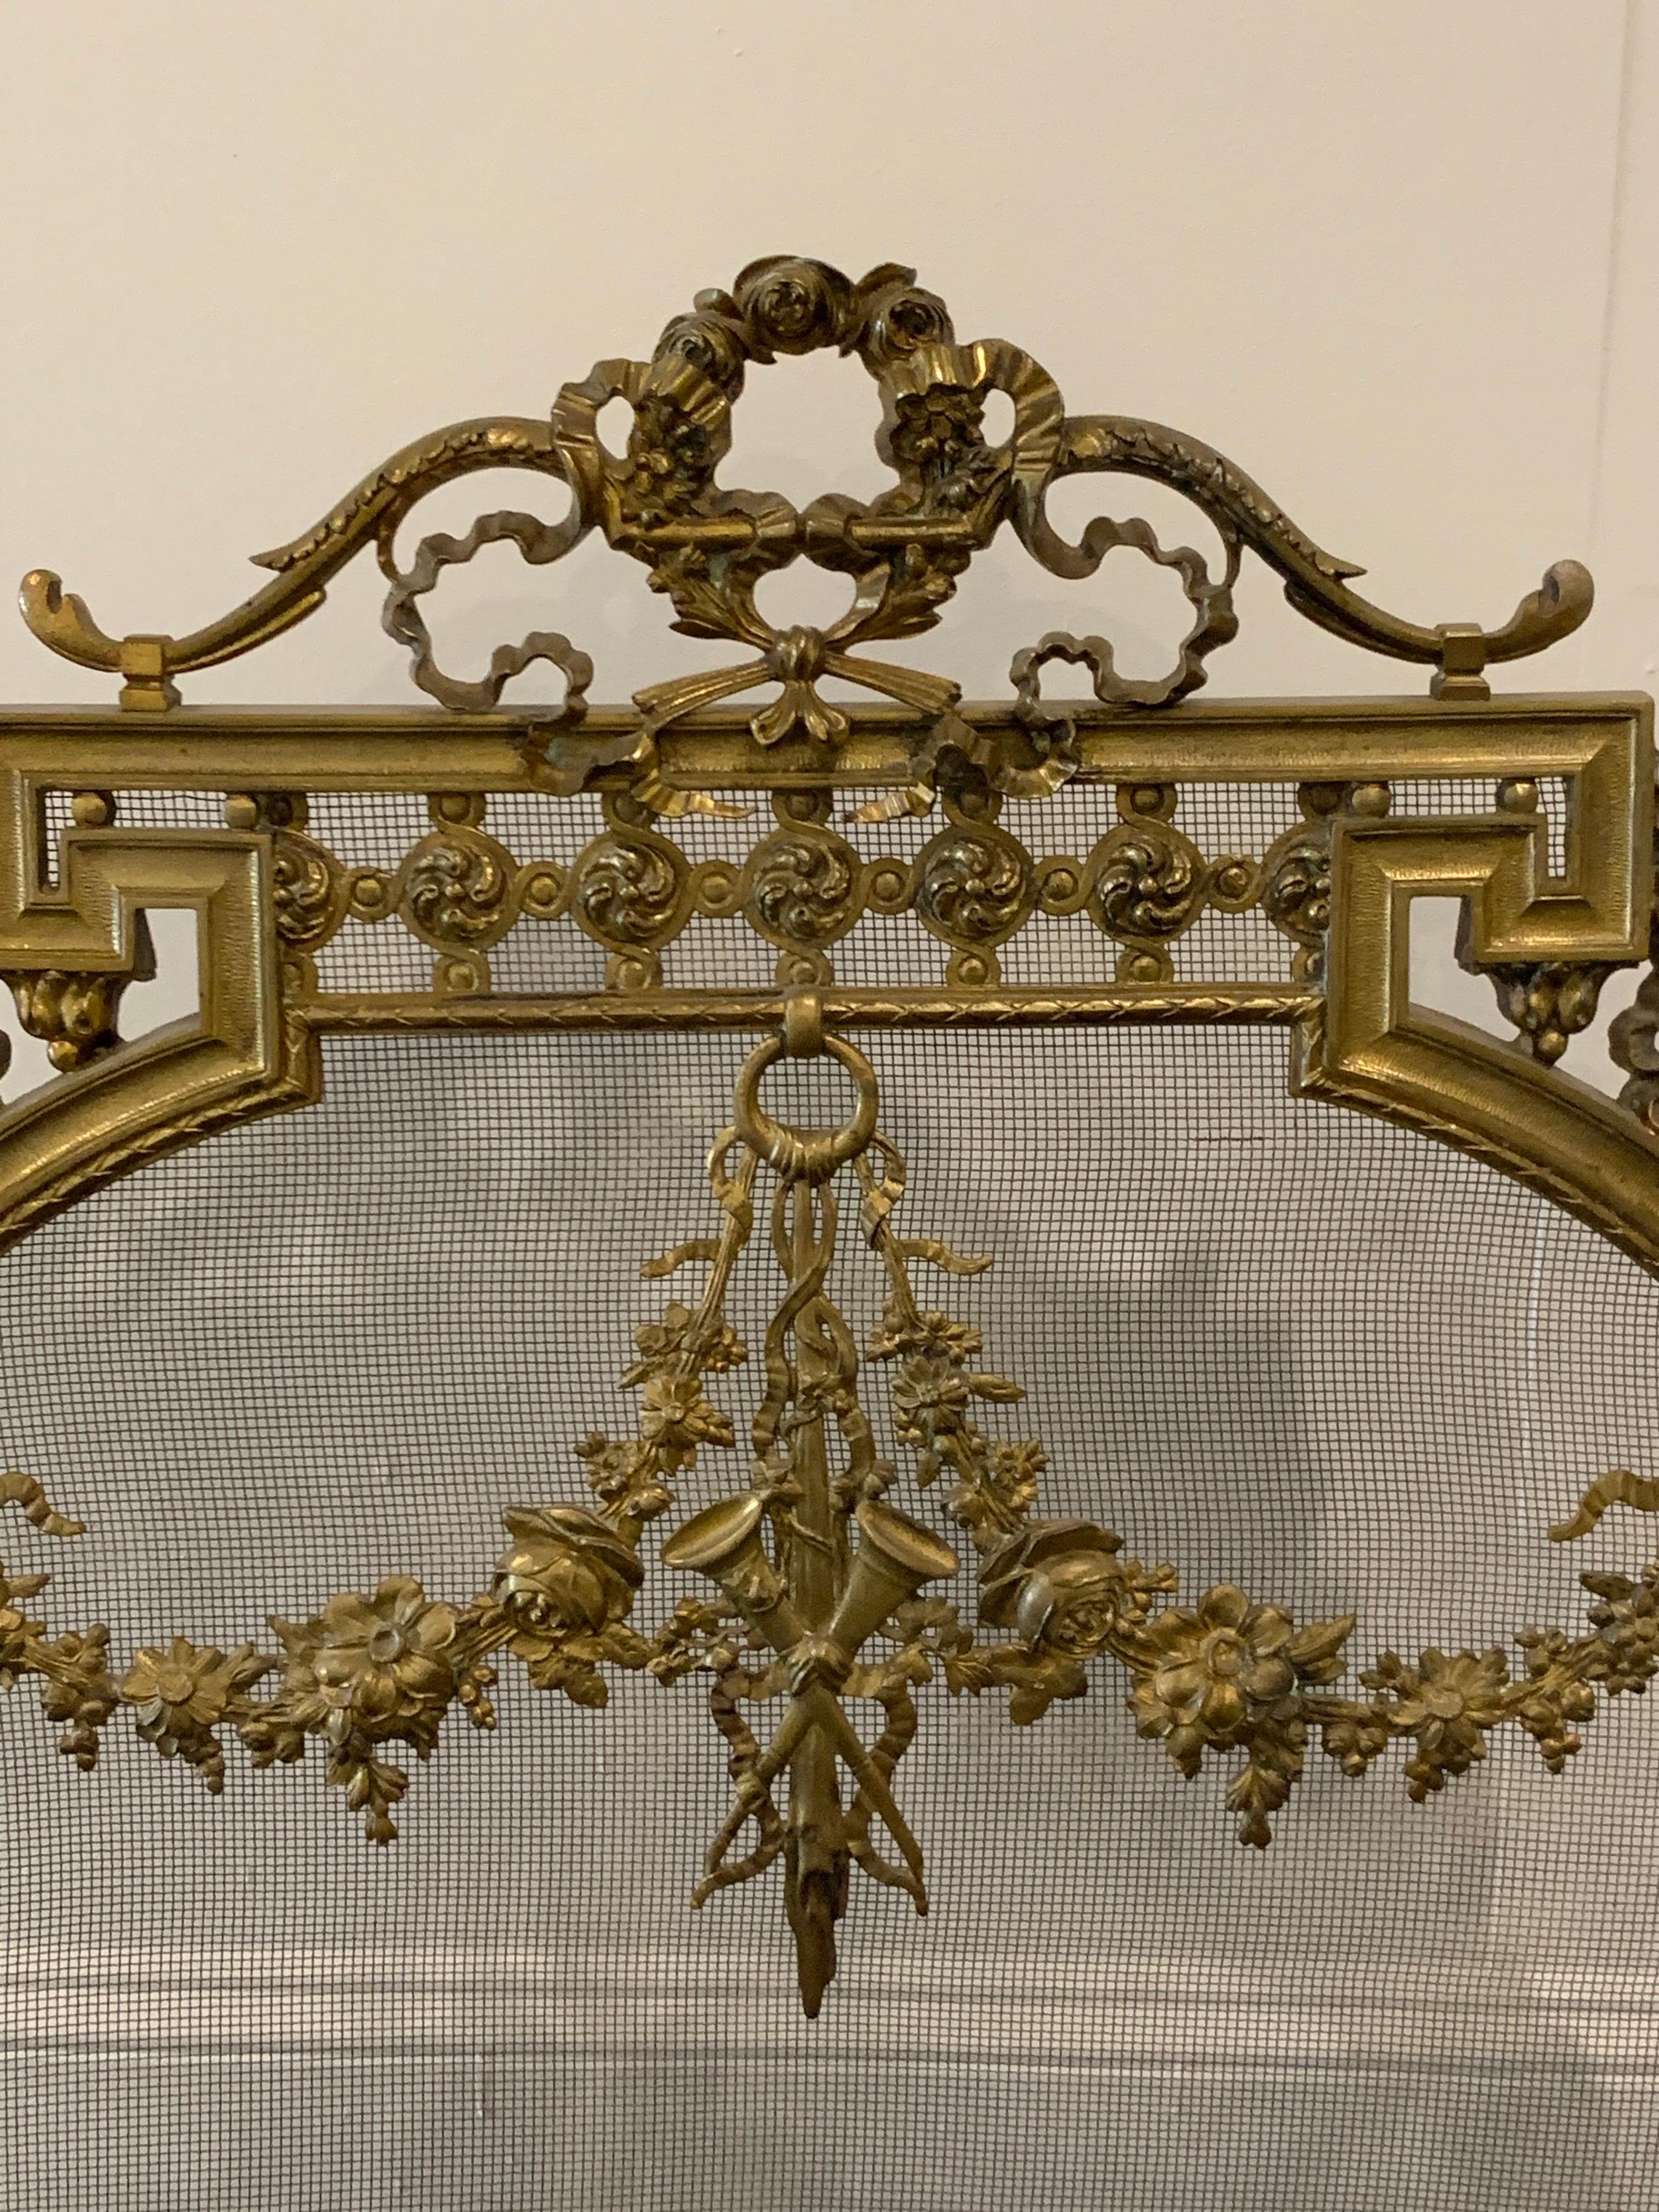 Lovely French Louis XVI gilt bronze fire screen. Interesting circular shape with images of flowers, ribbons, an urn and musical instruments. A fabulous decorative accessory!